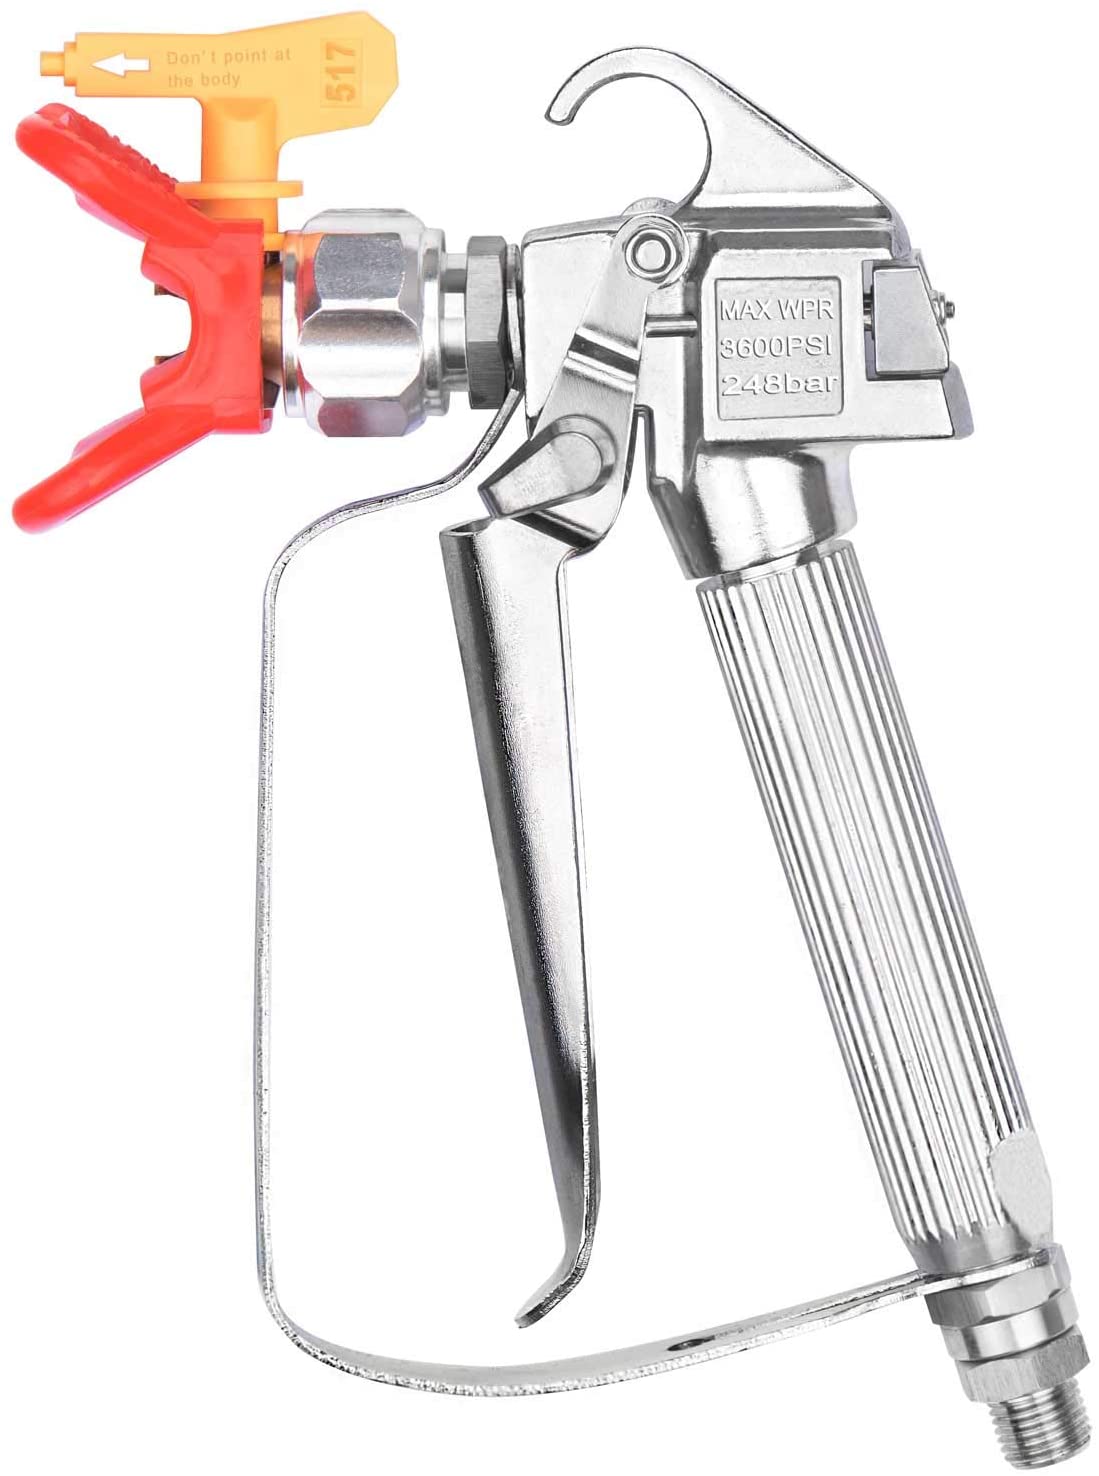 JWGJW Airless Paint Spray Gun With 517 Tip